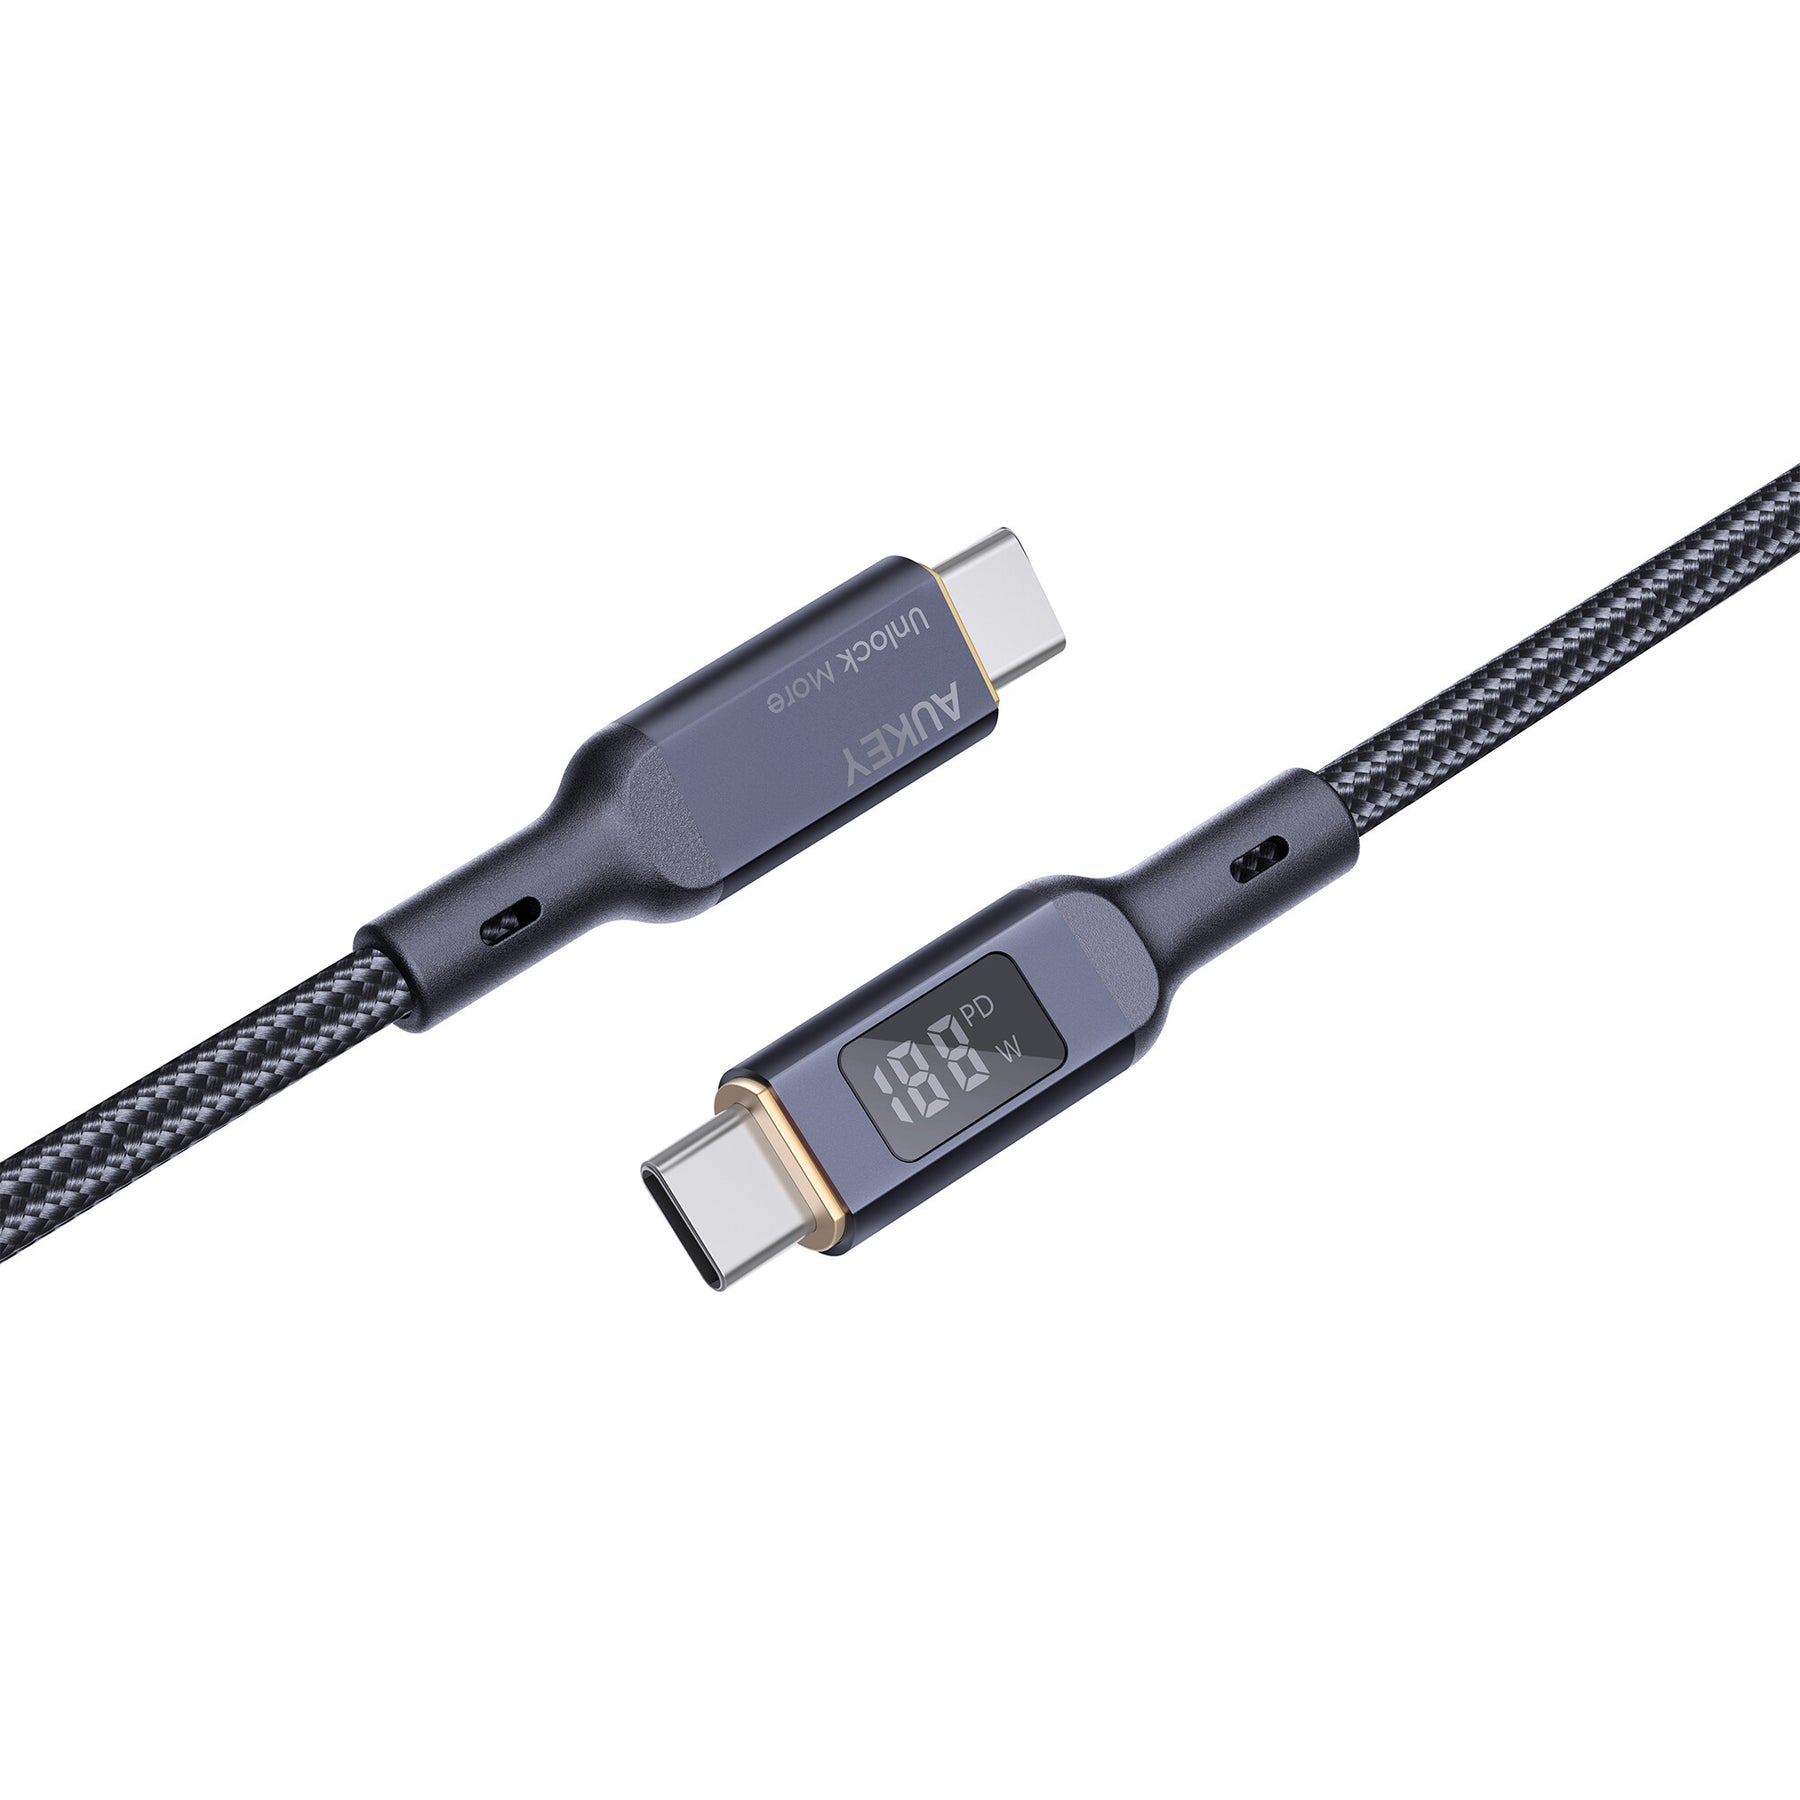 Aukey Circlet Blink 100W Nylon Braided USB C to C Power Delivery Type C Cable with LCD Display CB-MCC101